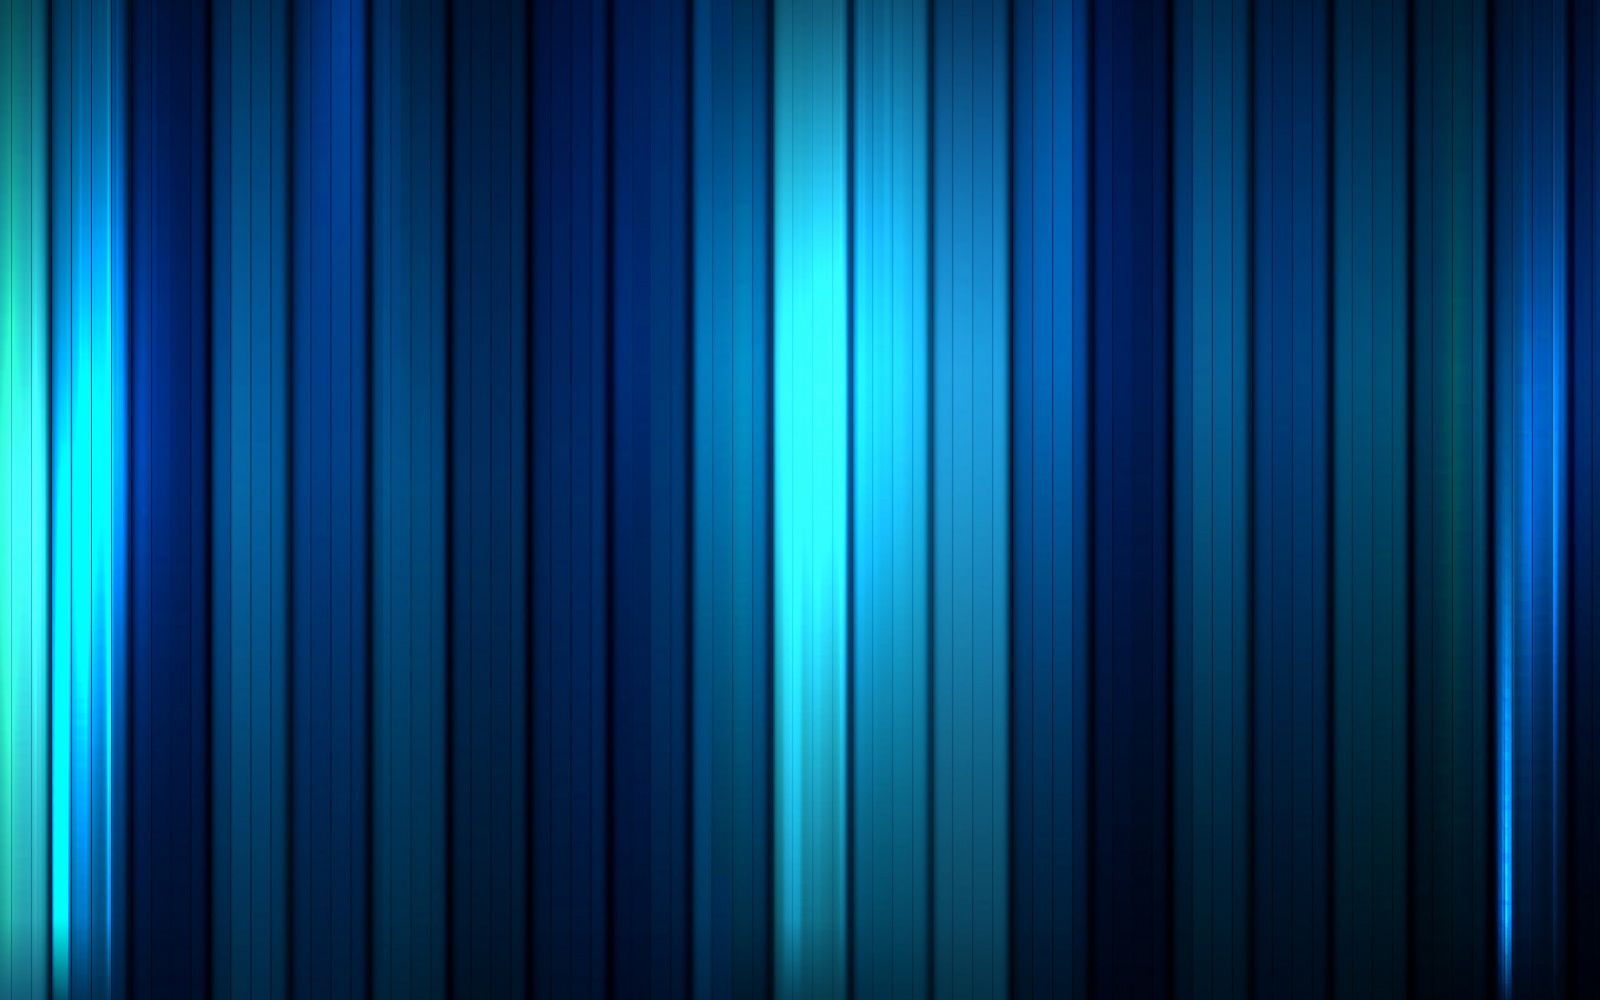 4K Blue Wallpaper Background That Will Give Your Desktop Perfect Readability